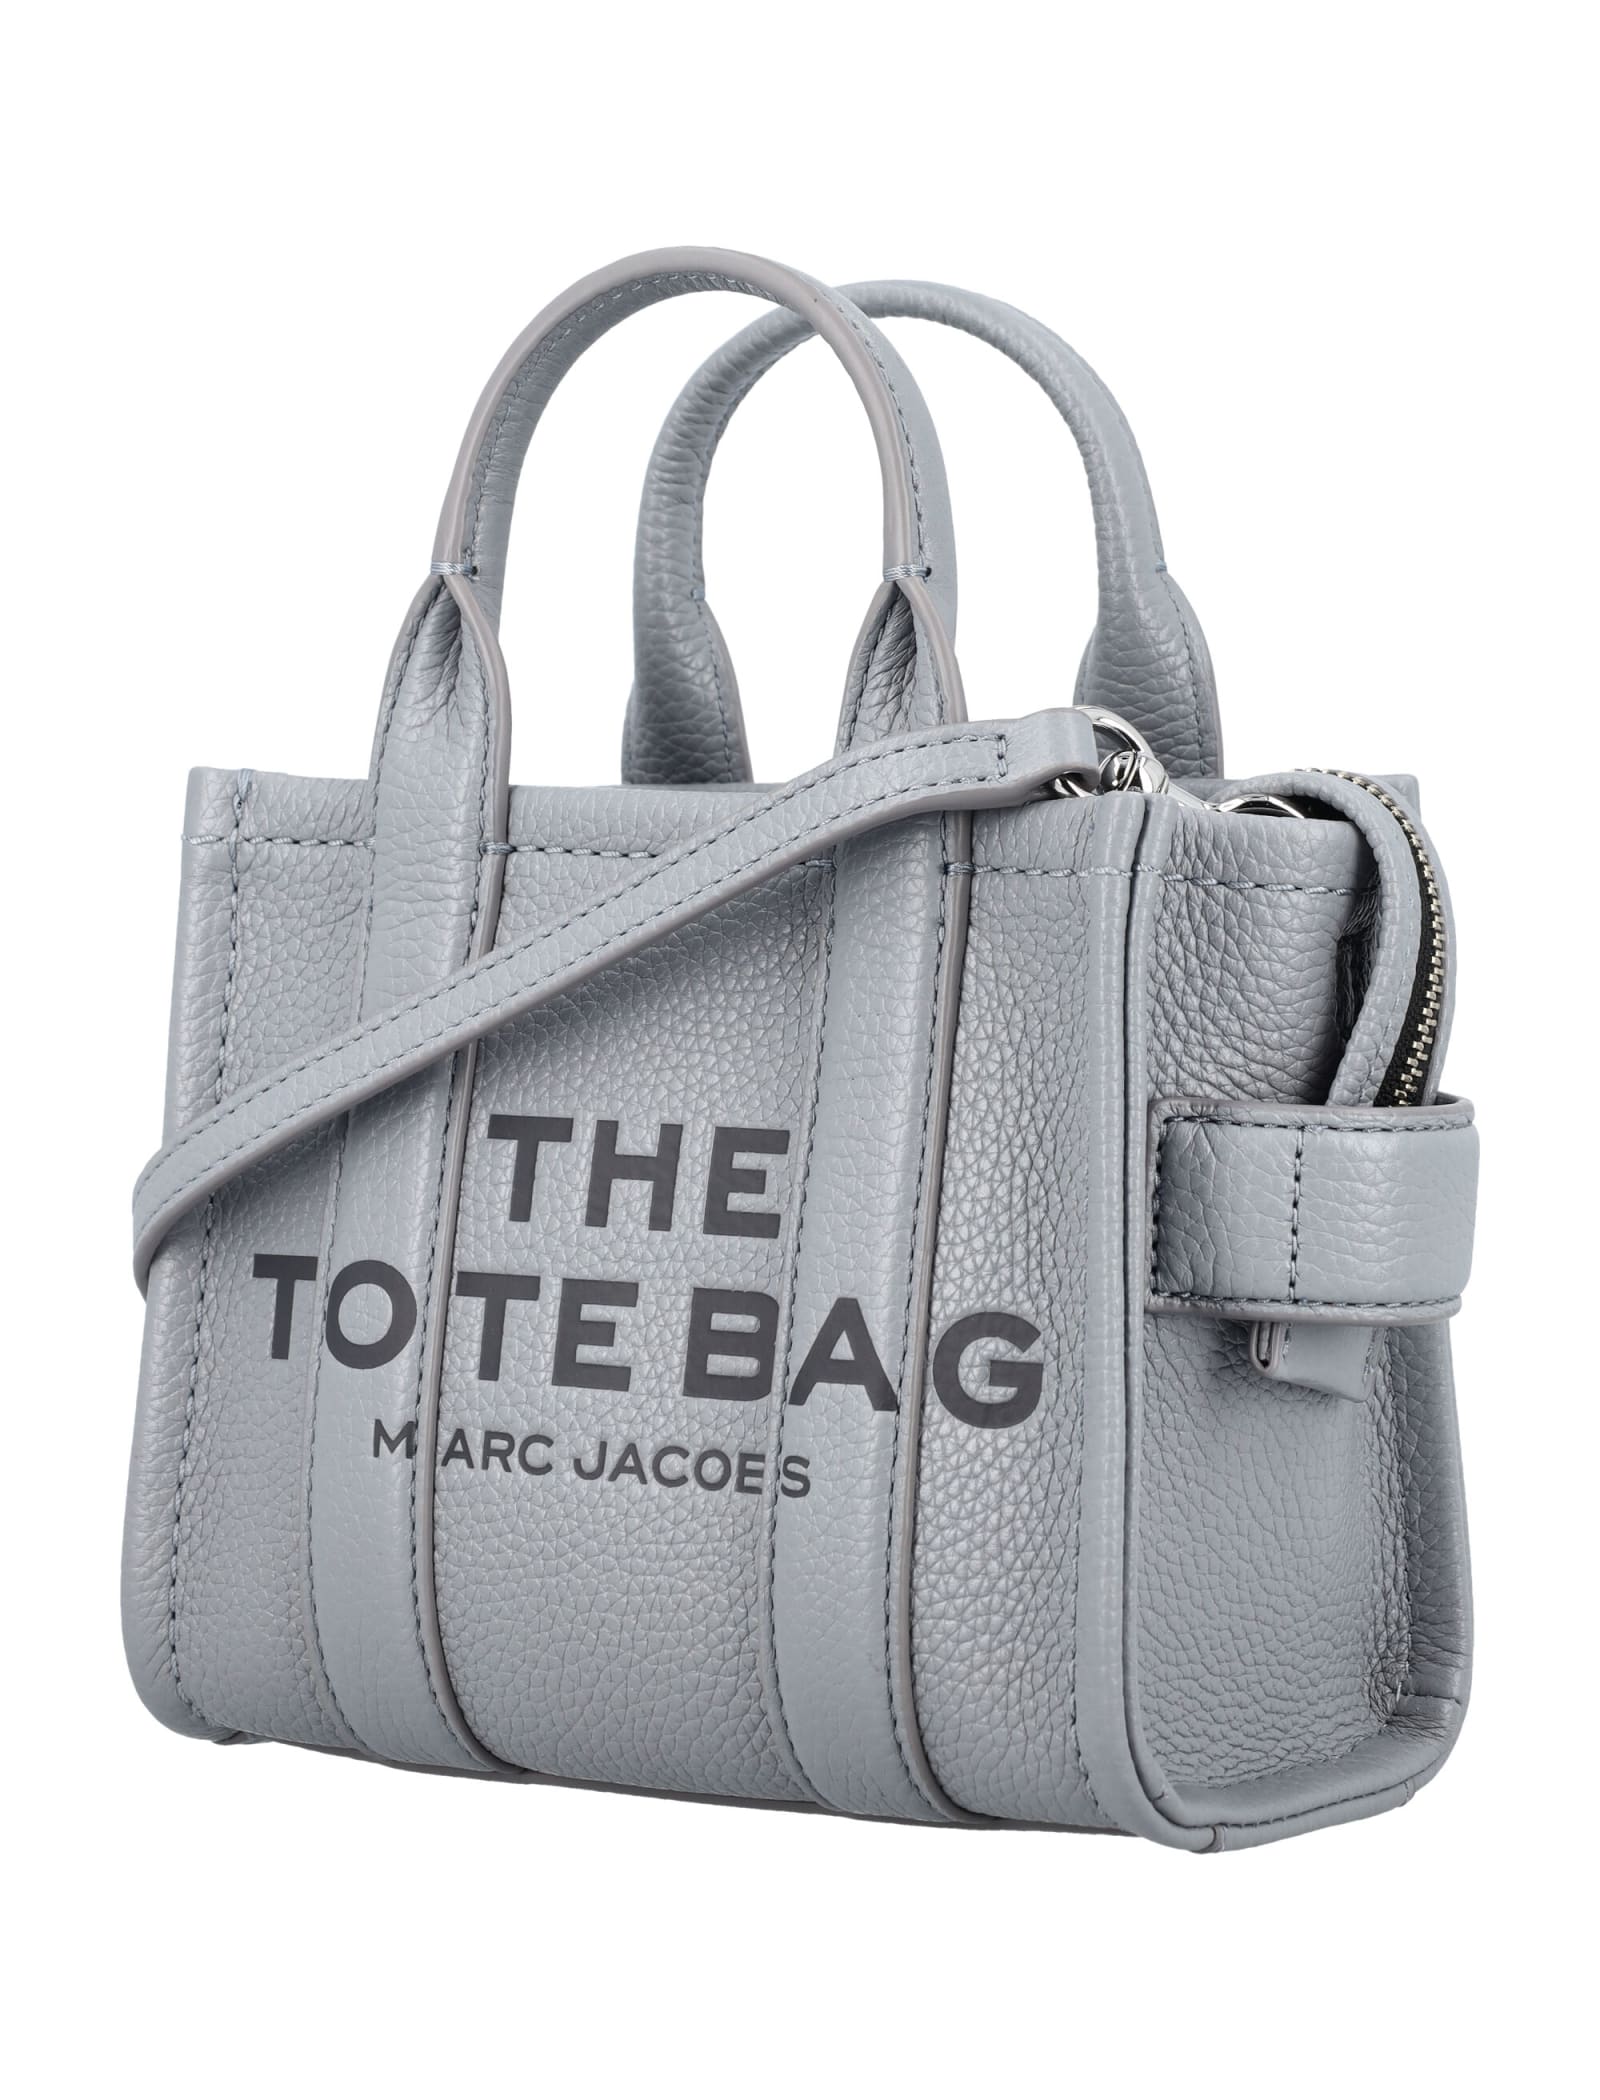 MARC JACOBS The Micro Tote in Wolf Grey – Cayman's